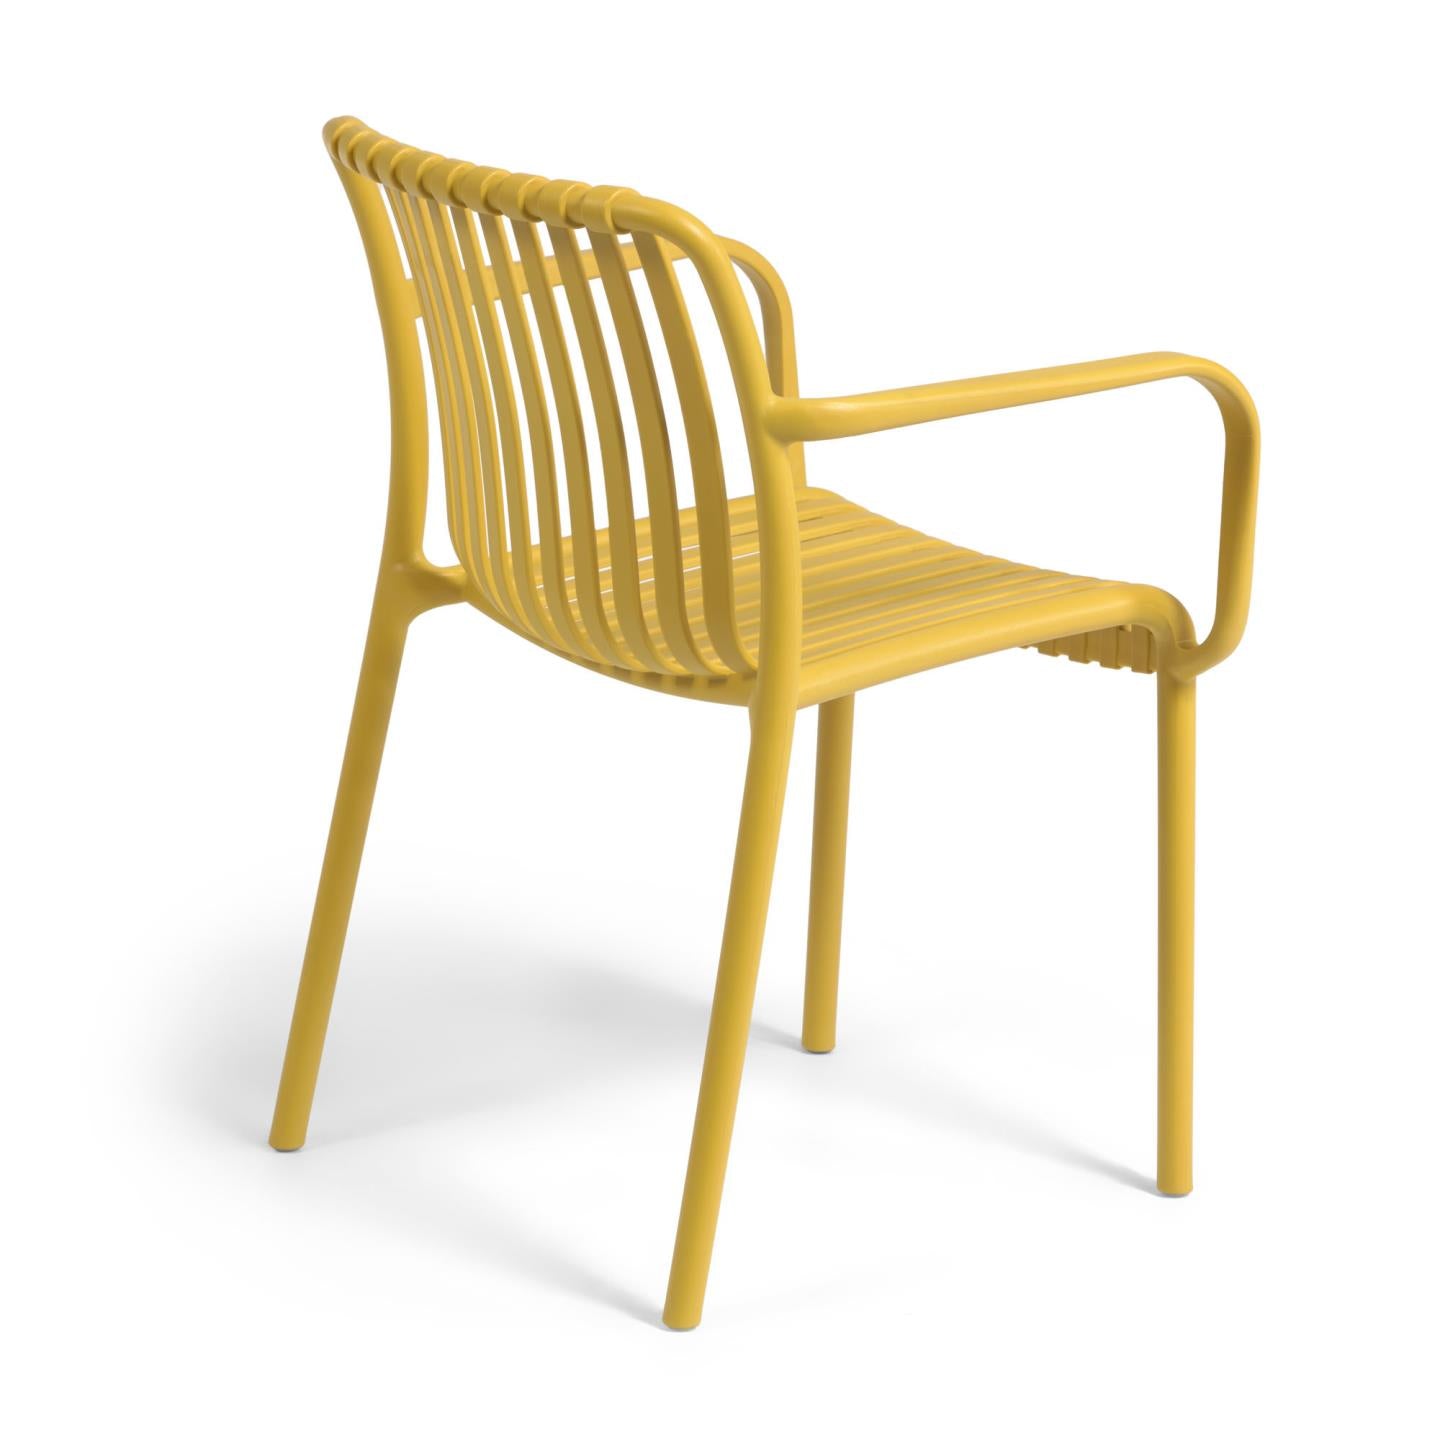 Isabellini stackable outdoor chair in yellow